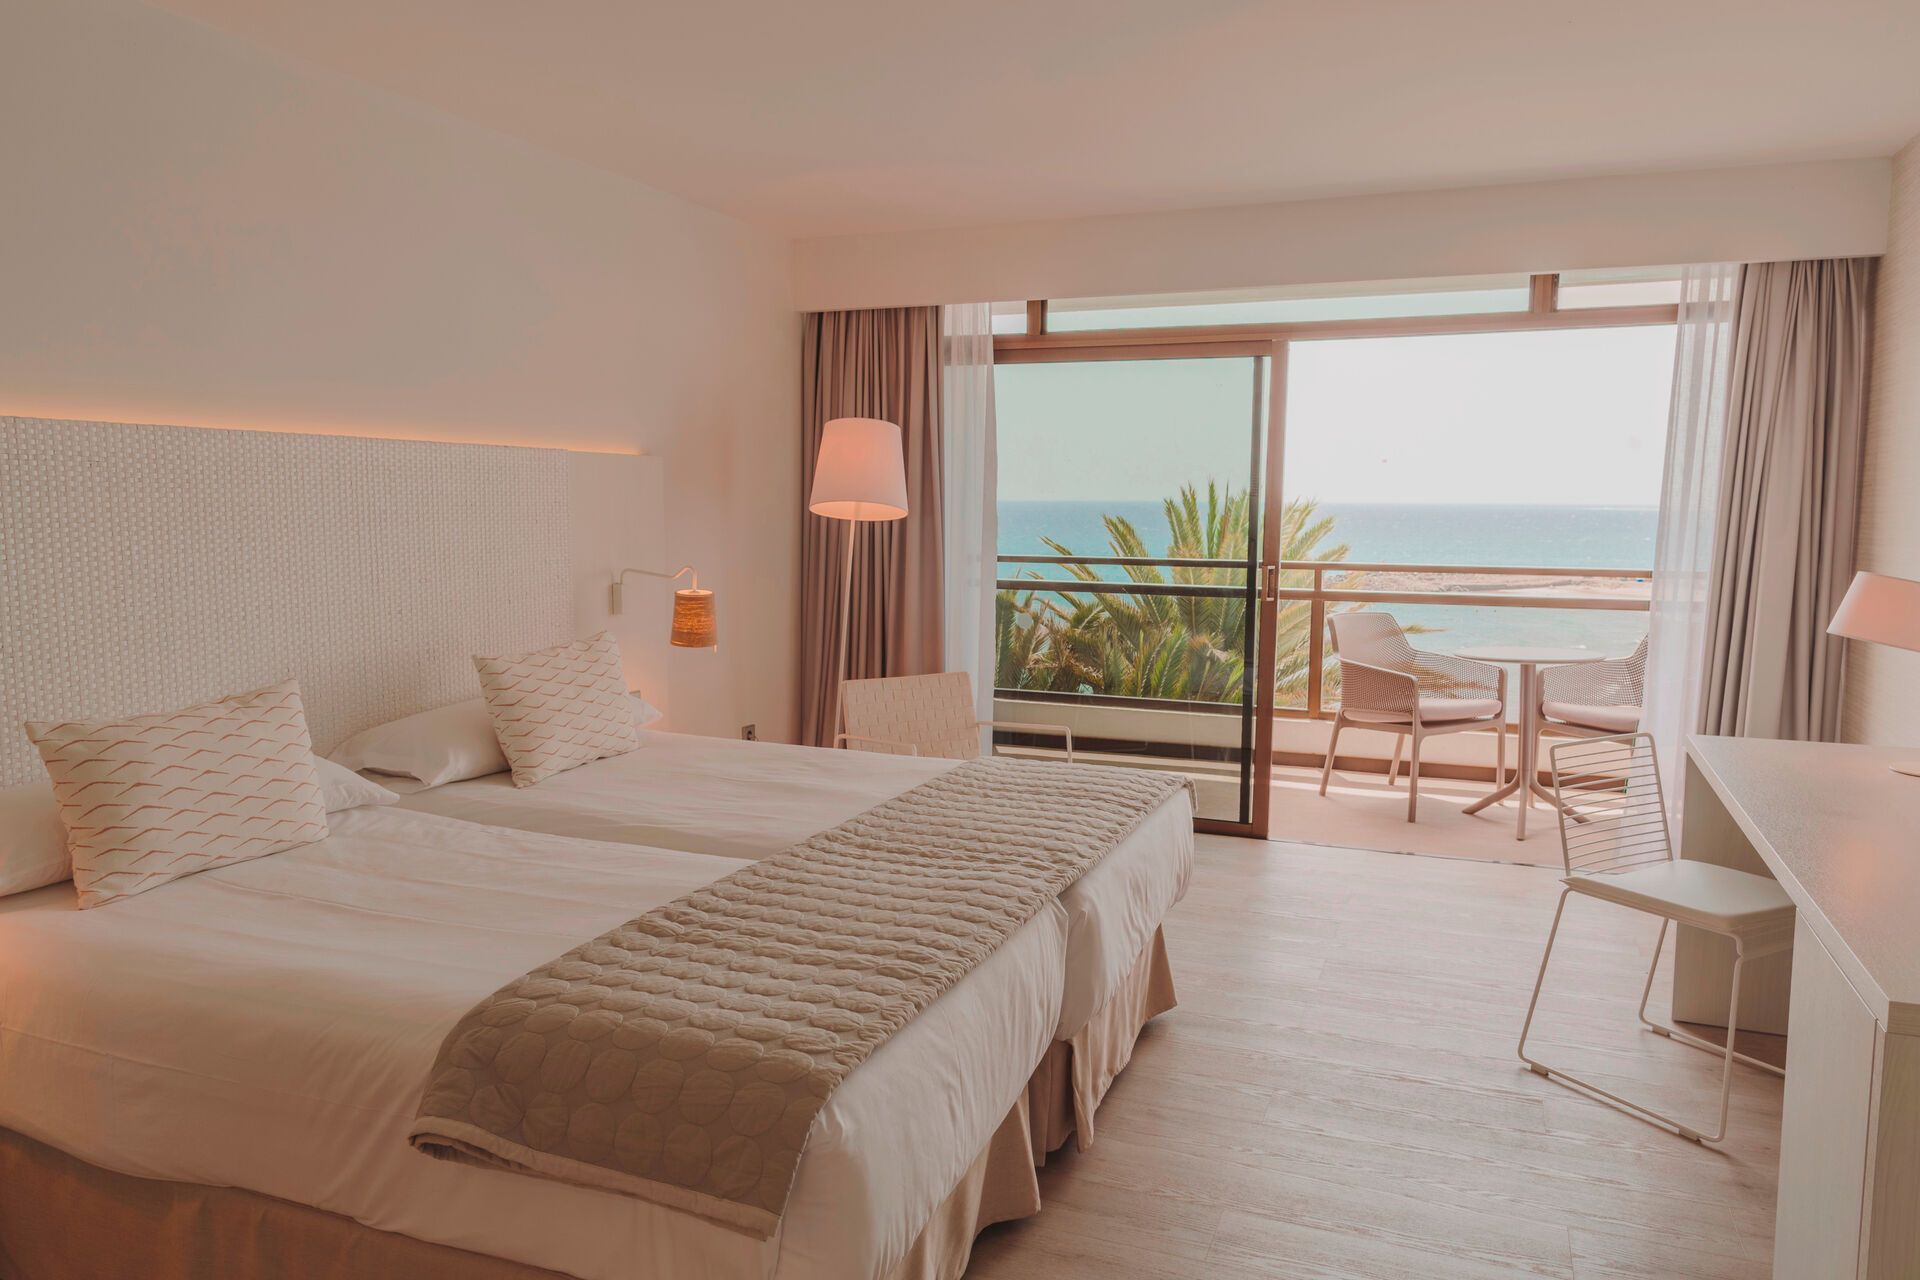 Canaries - Grande Canarie - Espagne - Hôtel Don Gregory by Dunas 4*